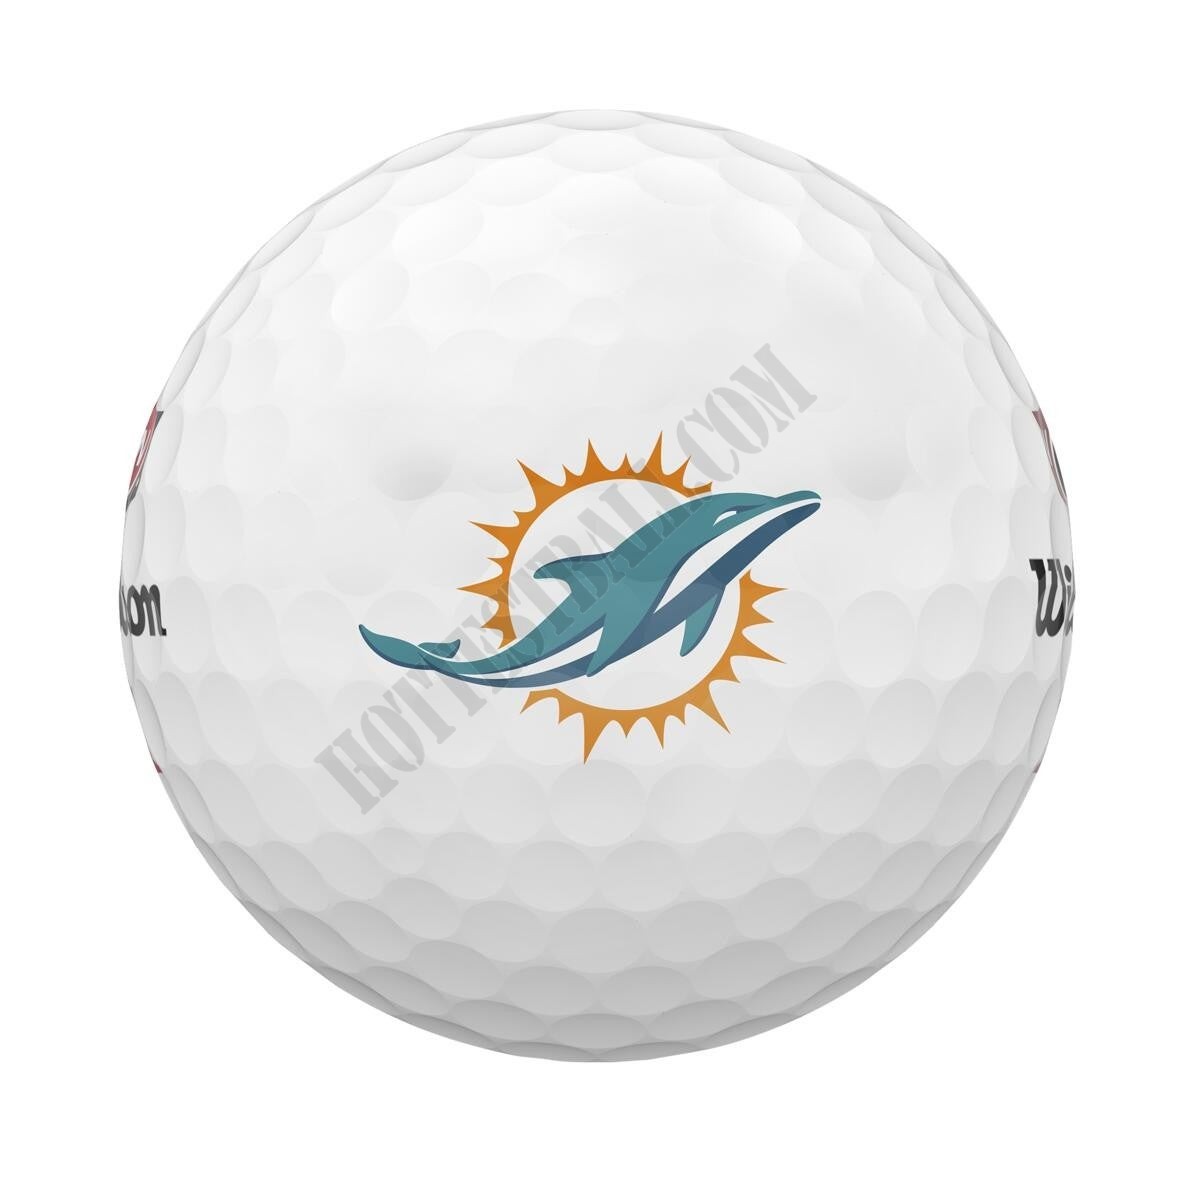 Duo Soft+ NFL Golf Balls - Miami Dolphins ● Wilson Promotions - -1